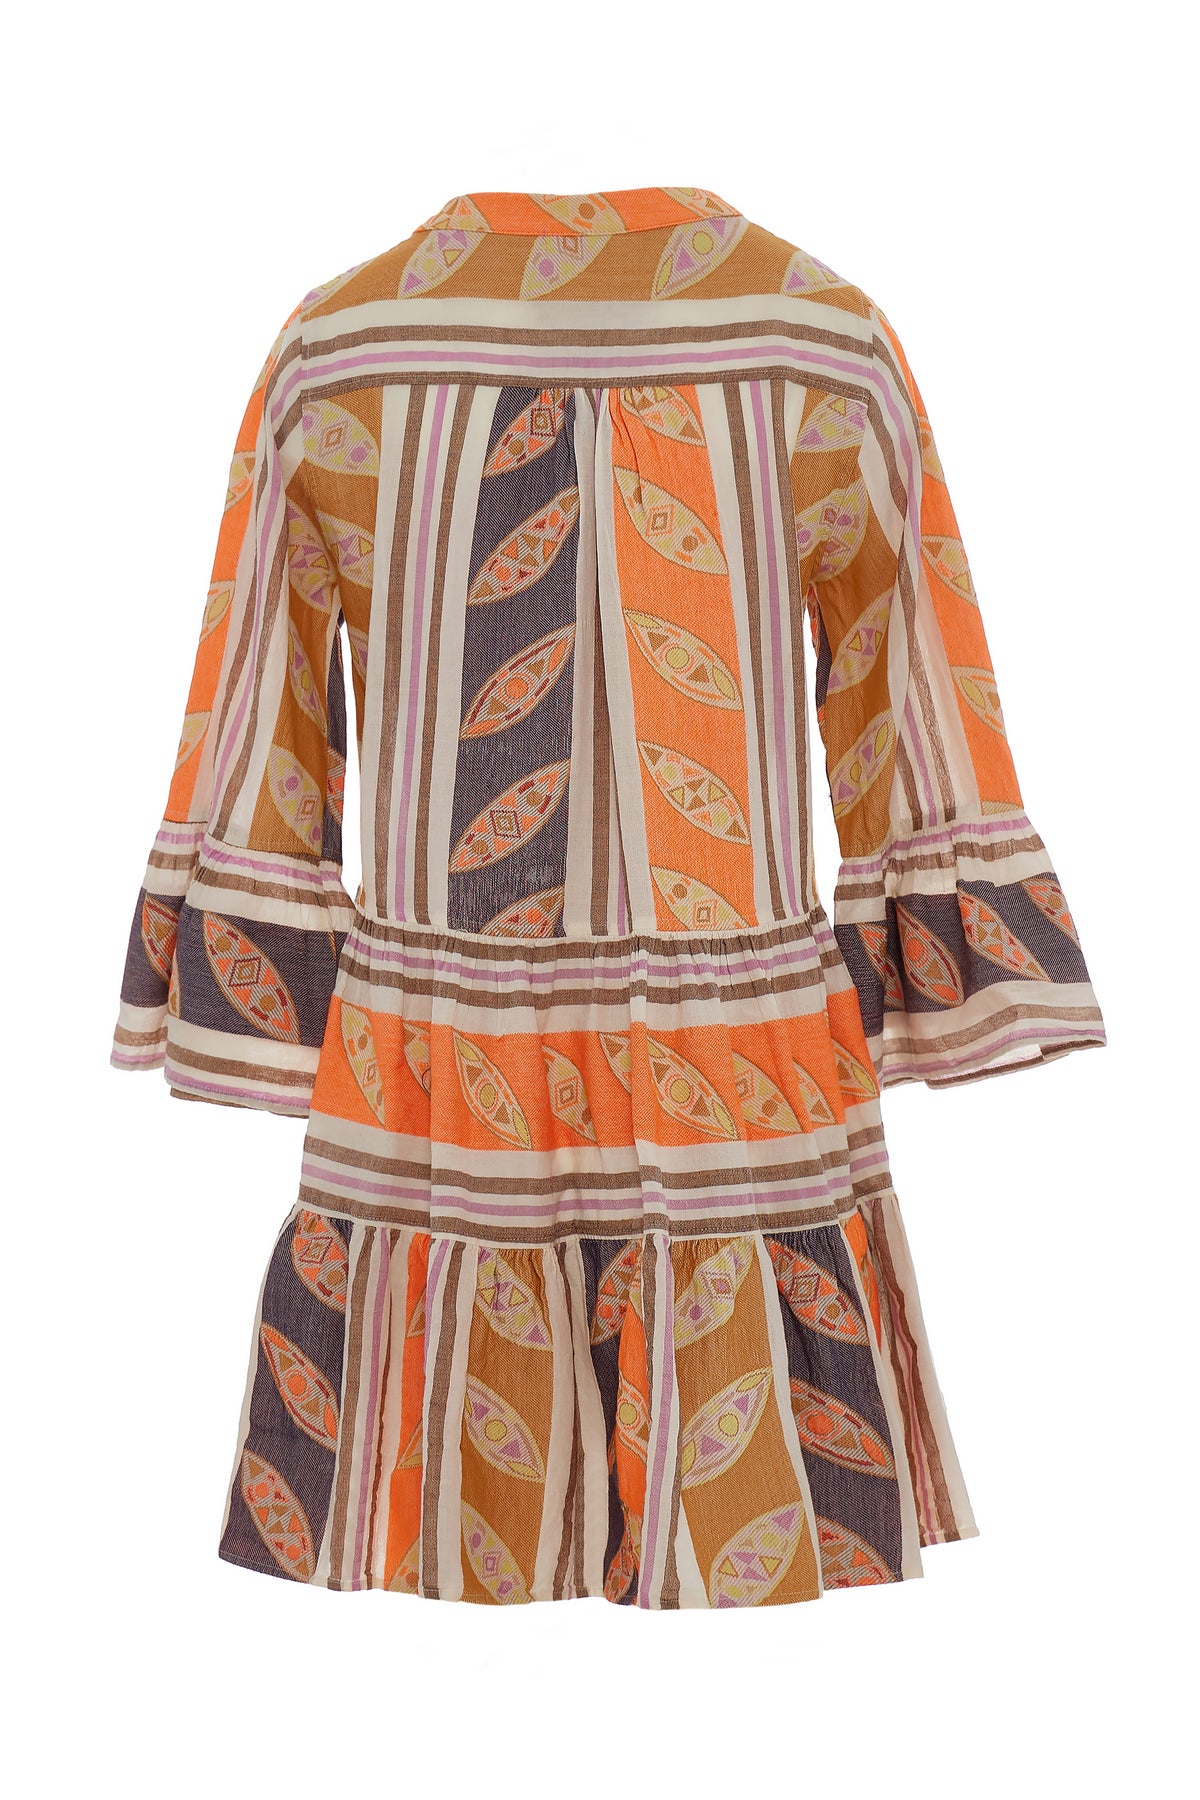 Notch neck short beach dress with long fluted sleeves and tiered skirt in orange and brown with lilac features